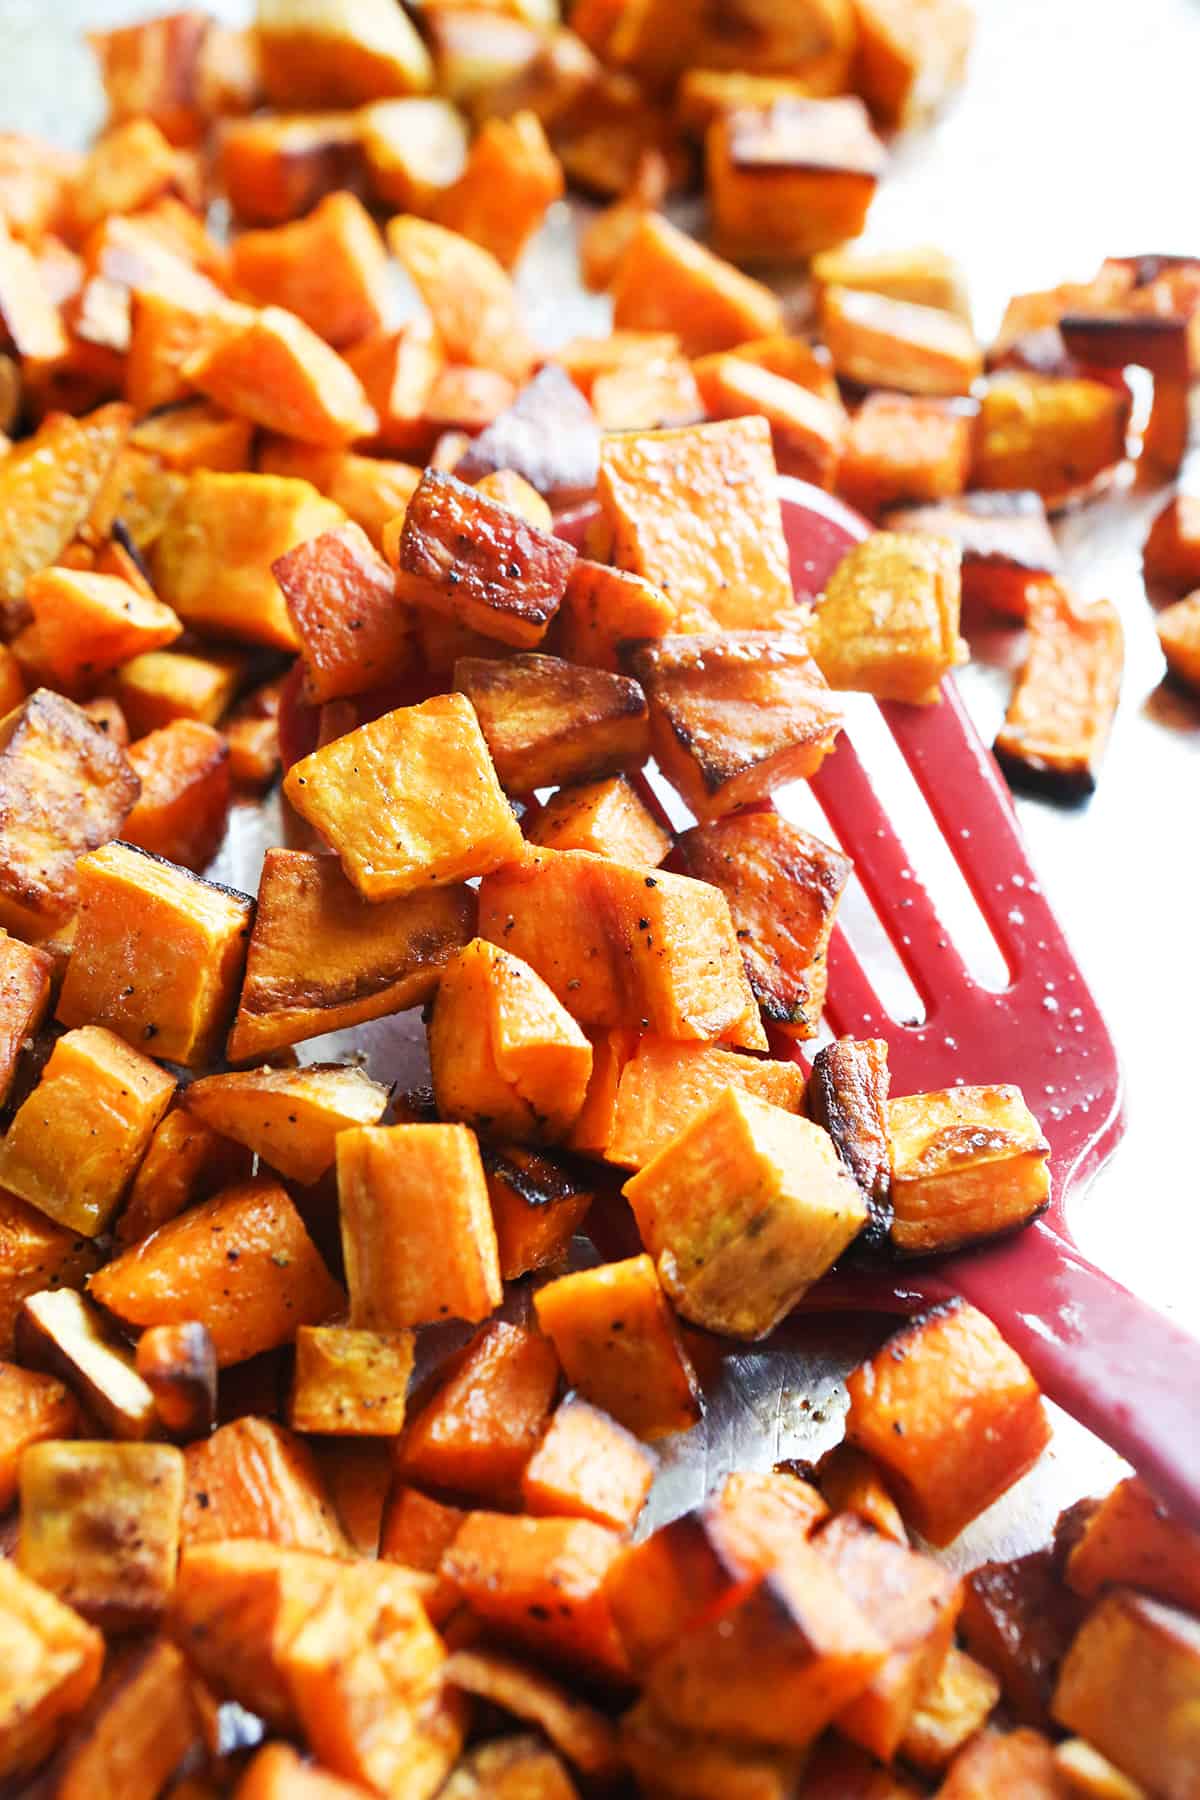 Baking sheet filled with roasted sweet potatoes.